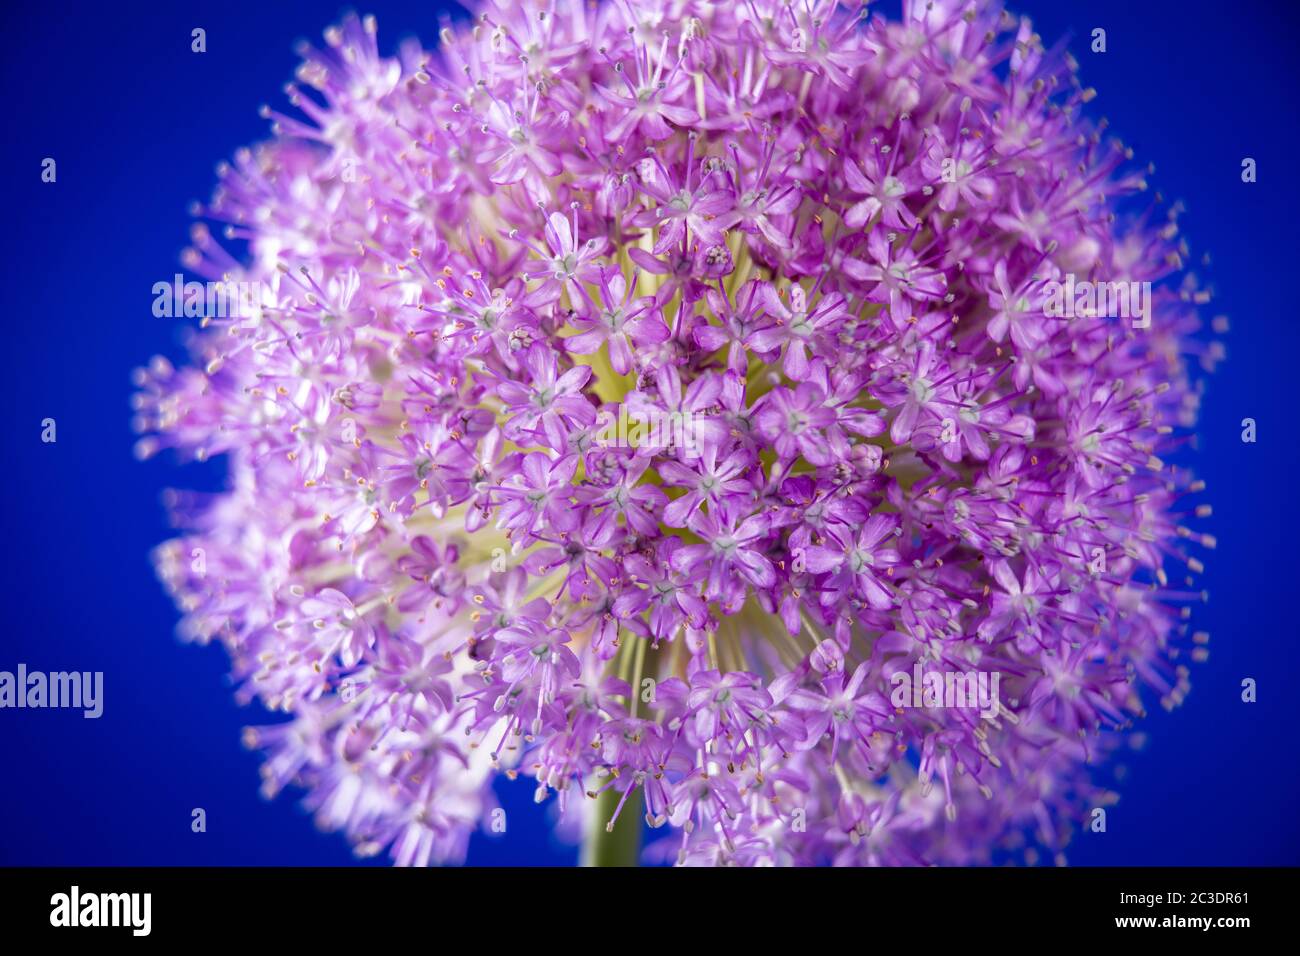 A single Allium grown in a garden in Warwickshire, England, UK. Allium is a genus of monocotyledonous flowering plants that includes hundreds of species, including the cultivated onion, garlic, scallion, shallot, leek, and chives. The generic name Allium is the Latin word for garlic, and the type species for the genus is Allium sativum which means 'cultivated garlic'. Stock Photo